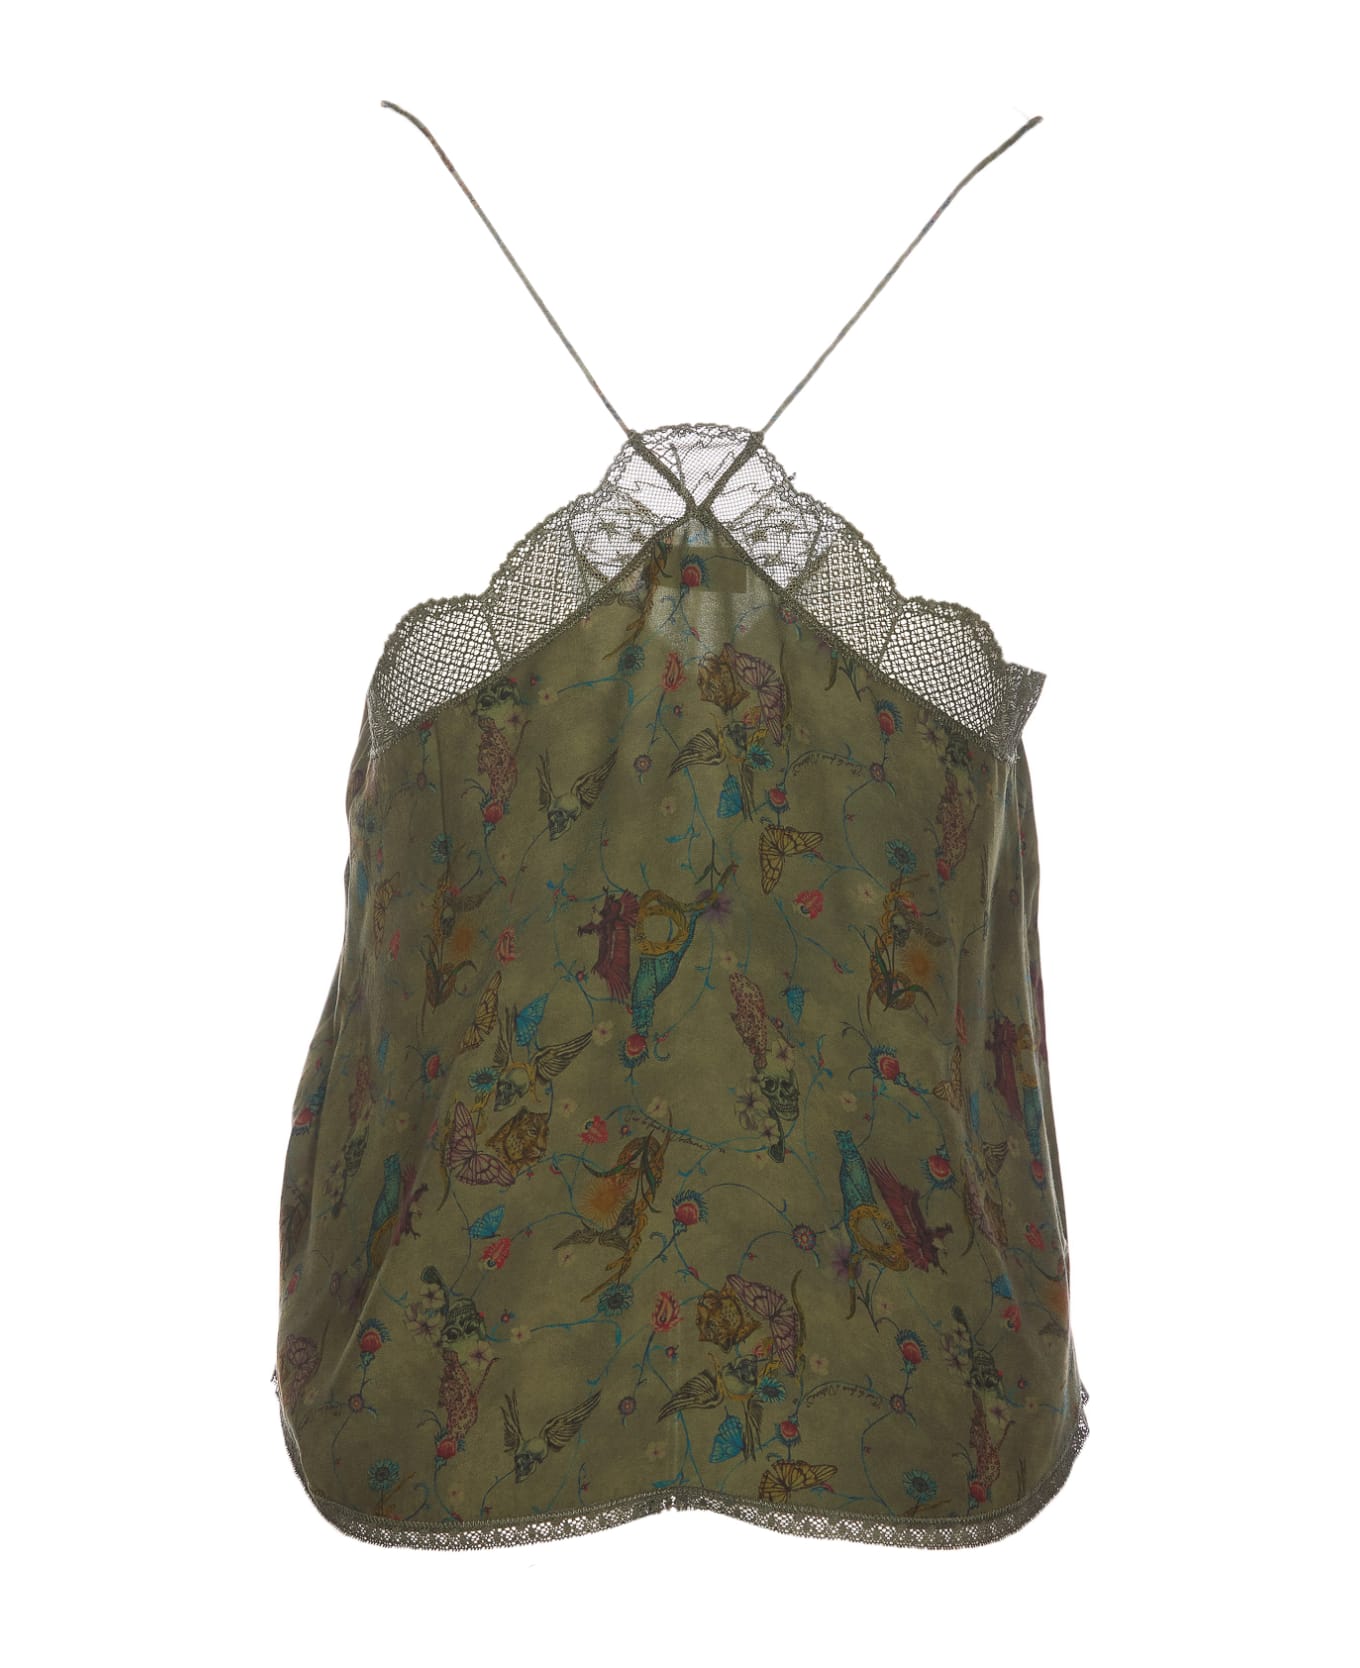 Zadig & Voltaire Christy Soft Holly Top - Green キャミソール